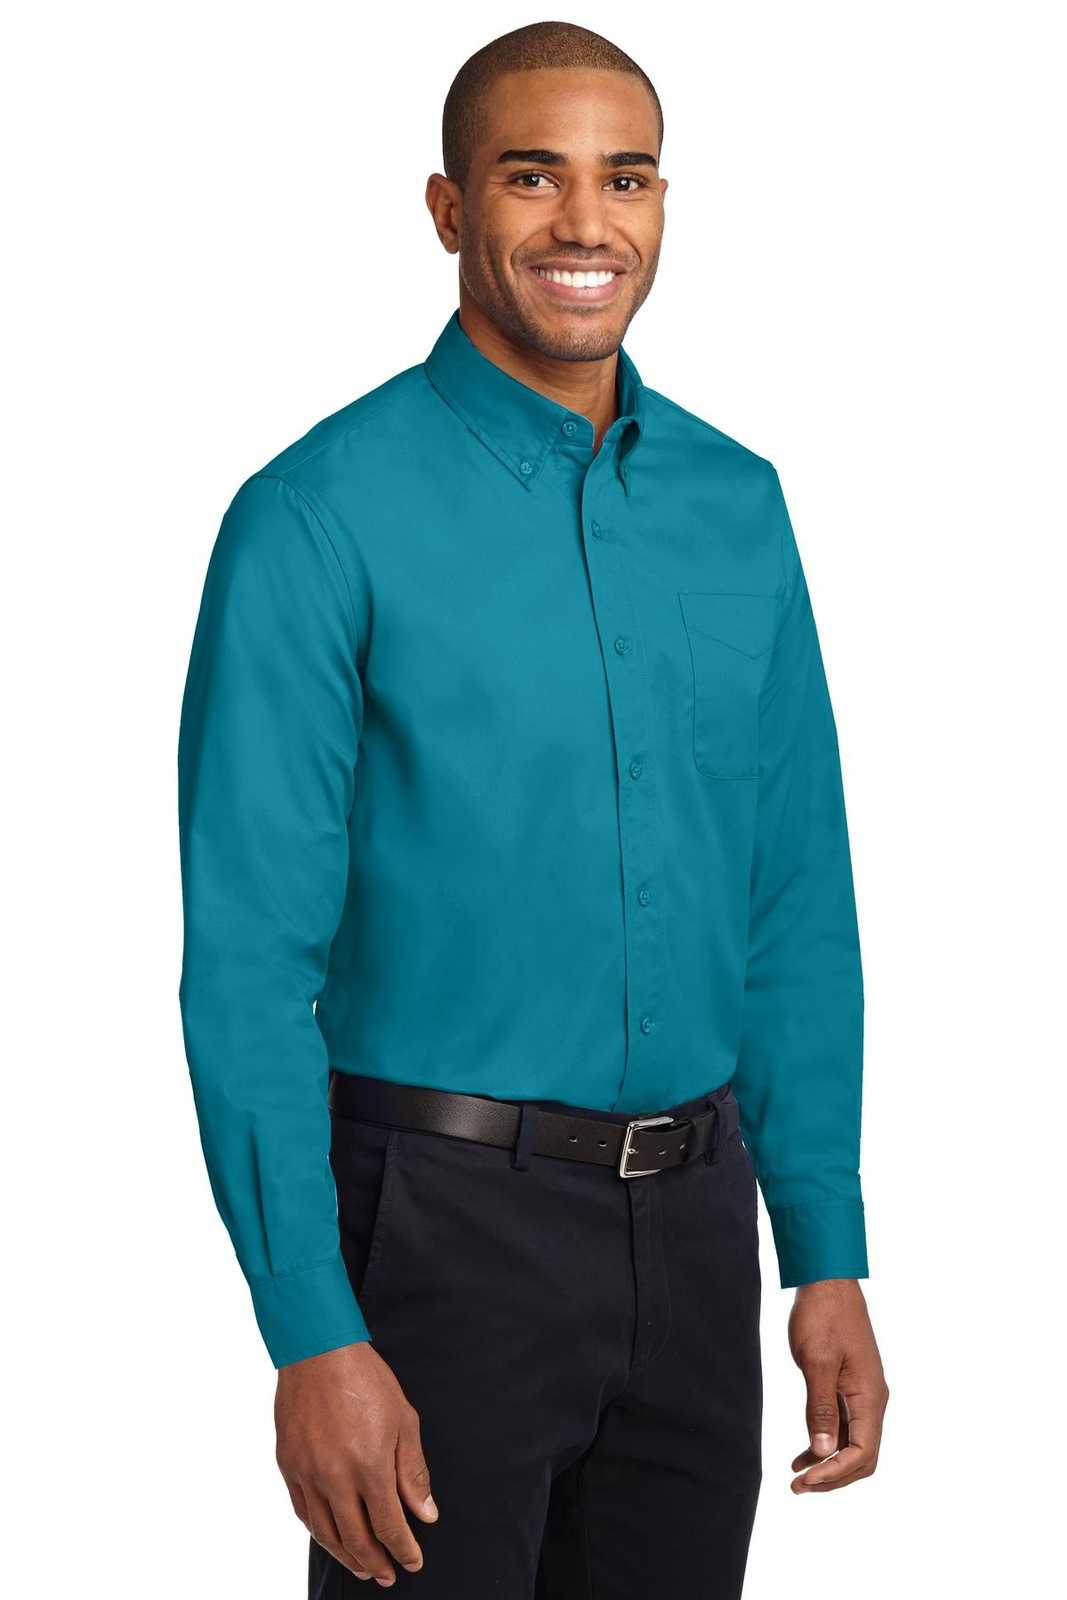 Port Authority S608 Long Sleeve Easy Care Shirt - Teal Green - HIT a Double - 4